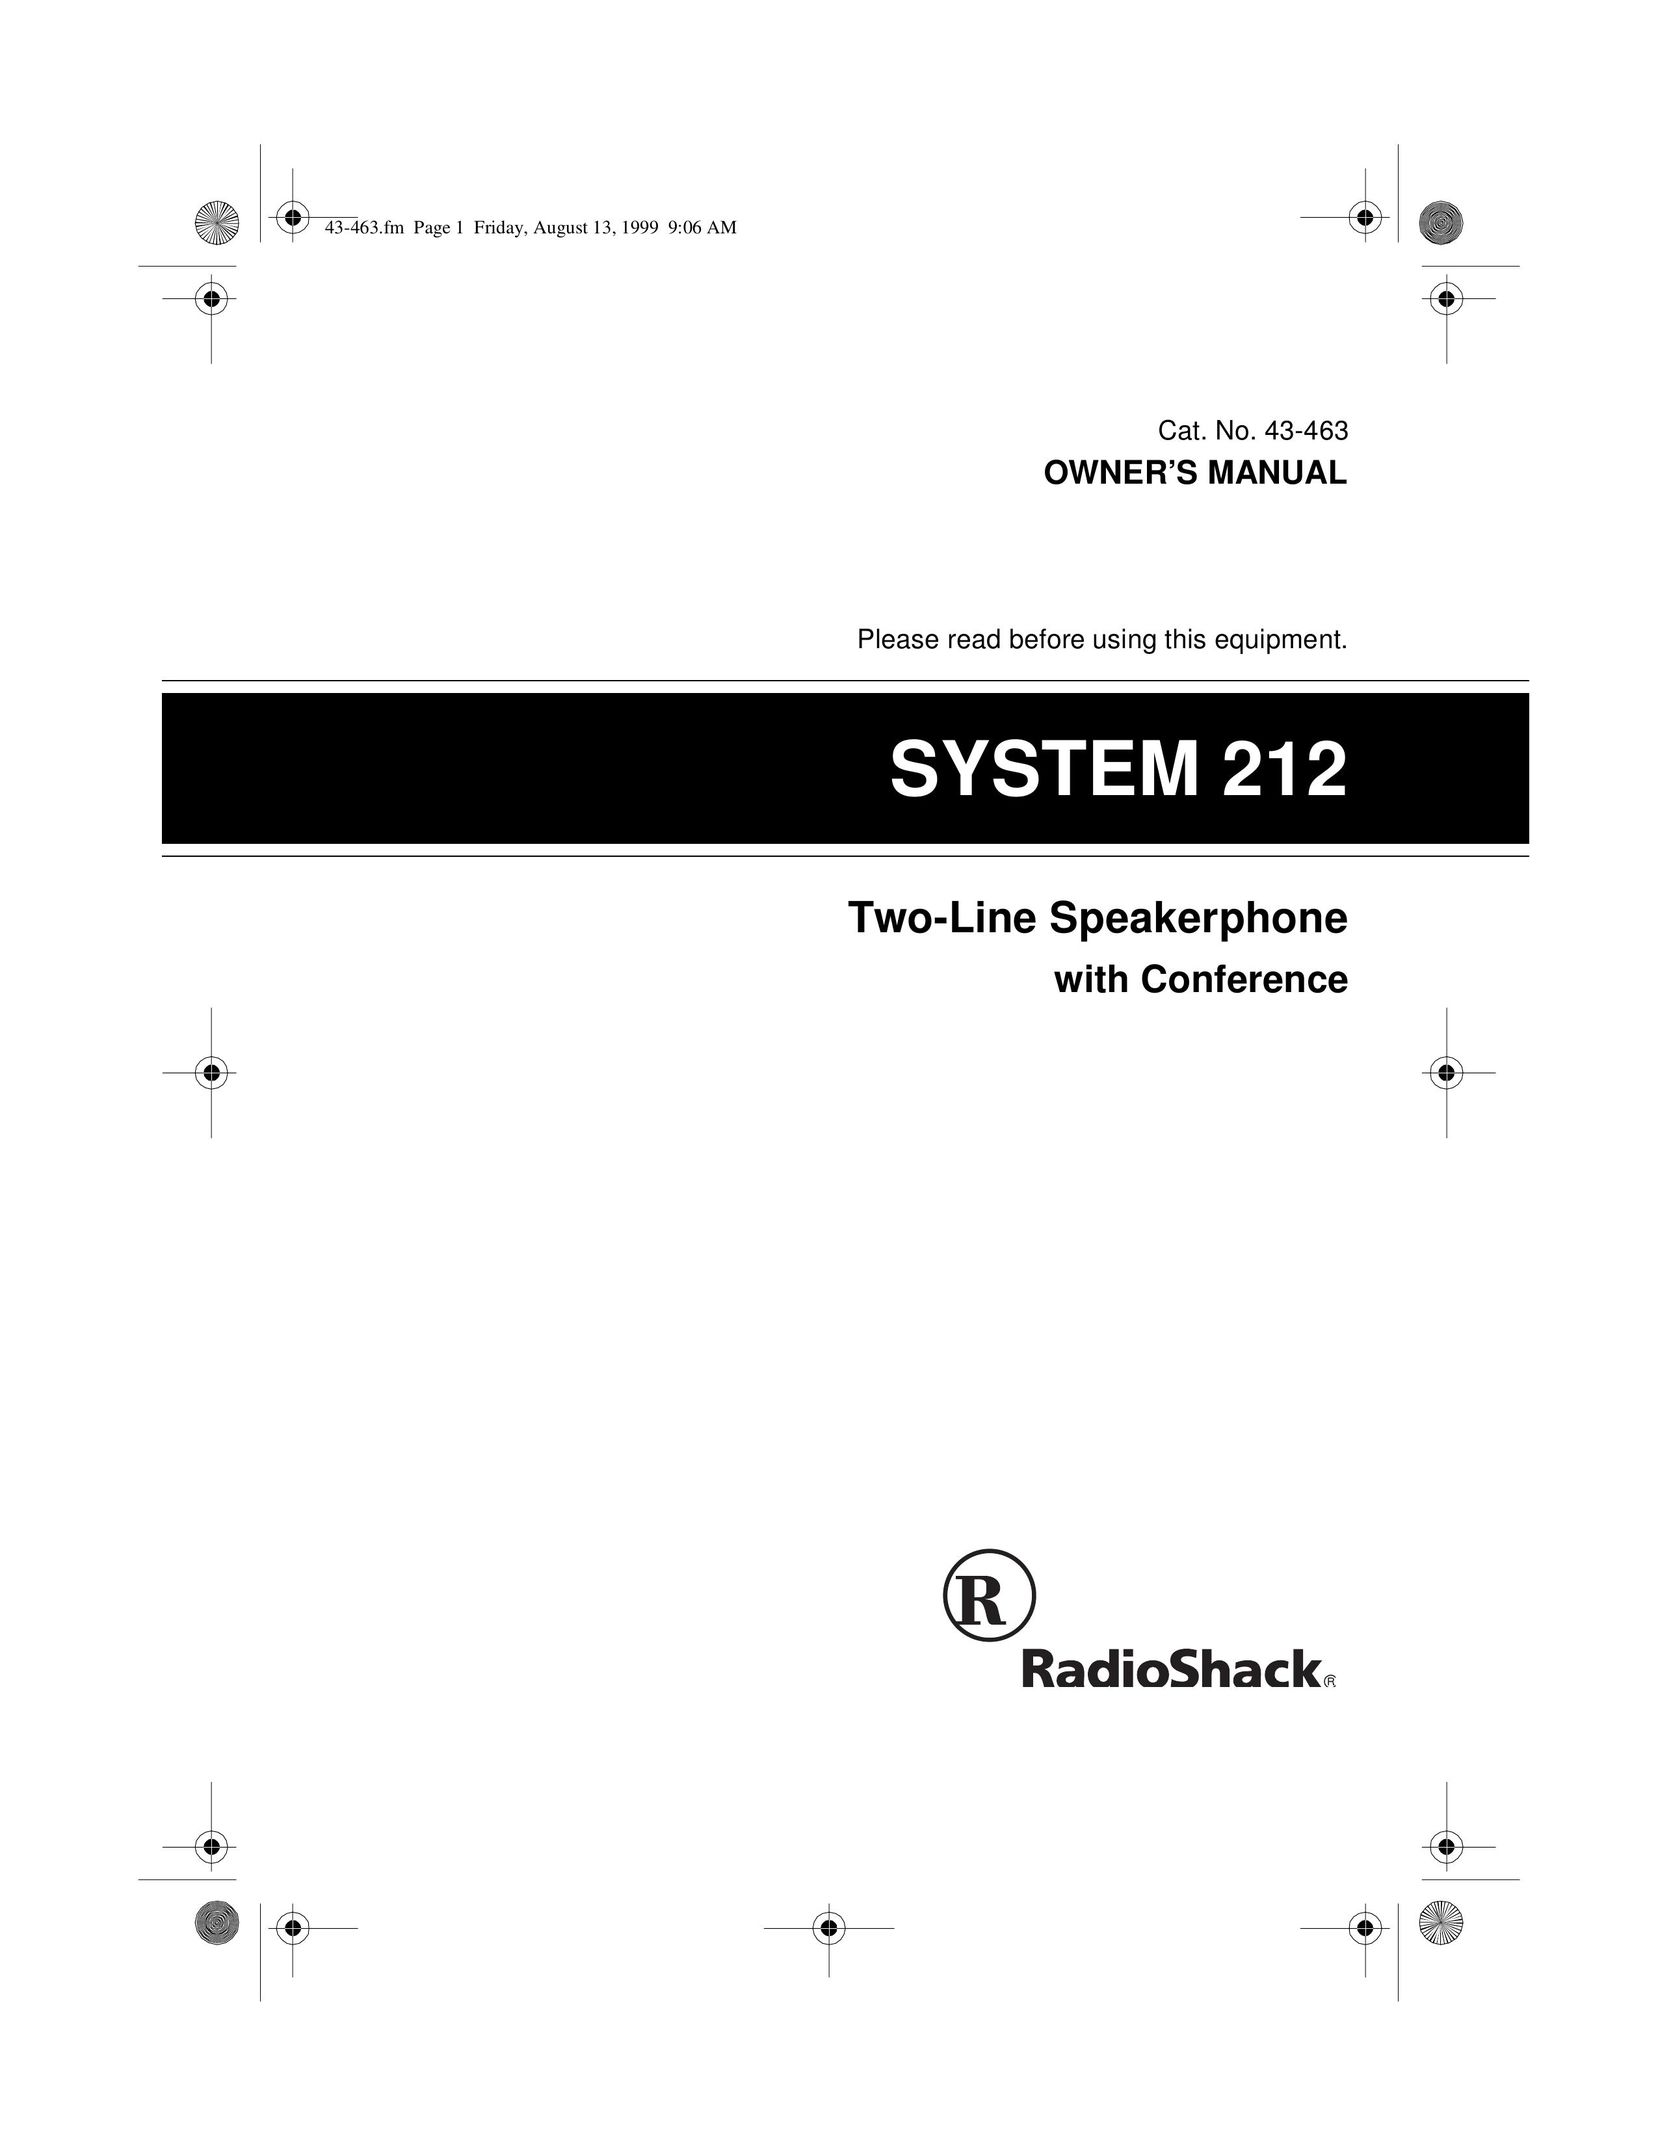 Radio Shack SYSTEM 212 Conference Phone User Manual